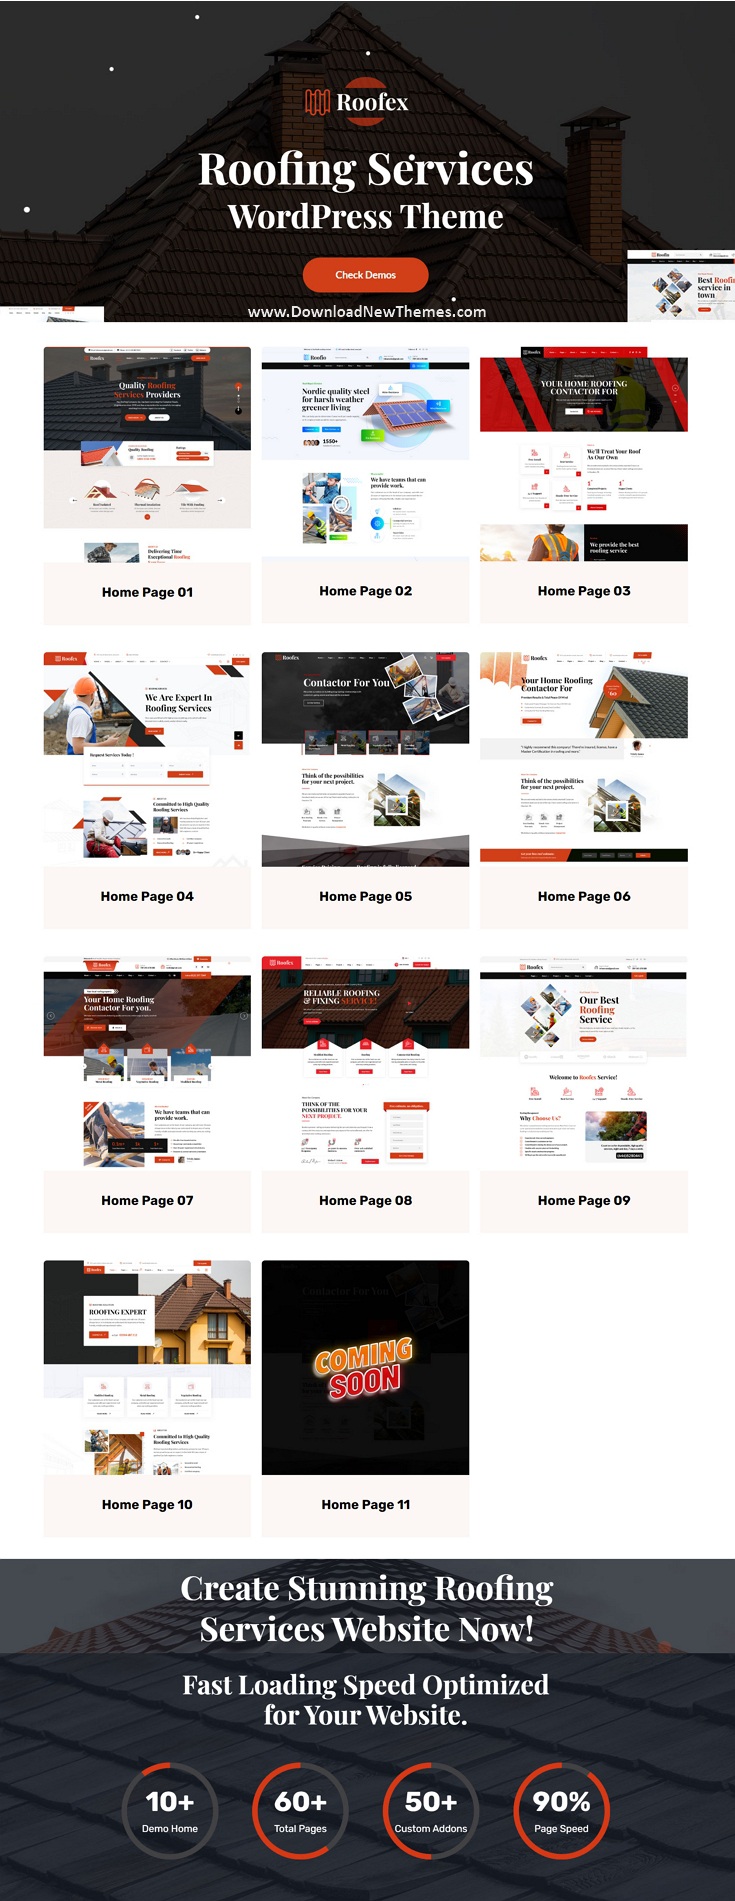 Roofex - Roofing Services WordPress Theme Review